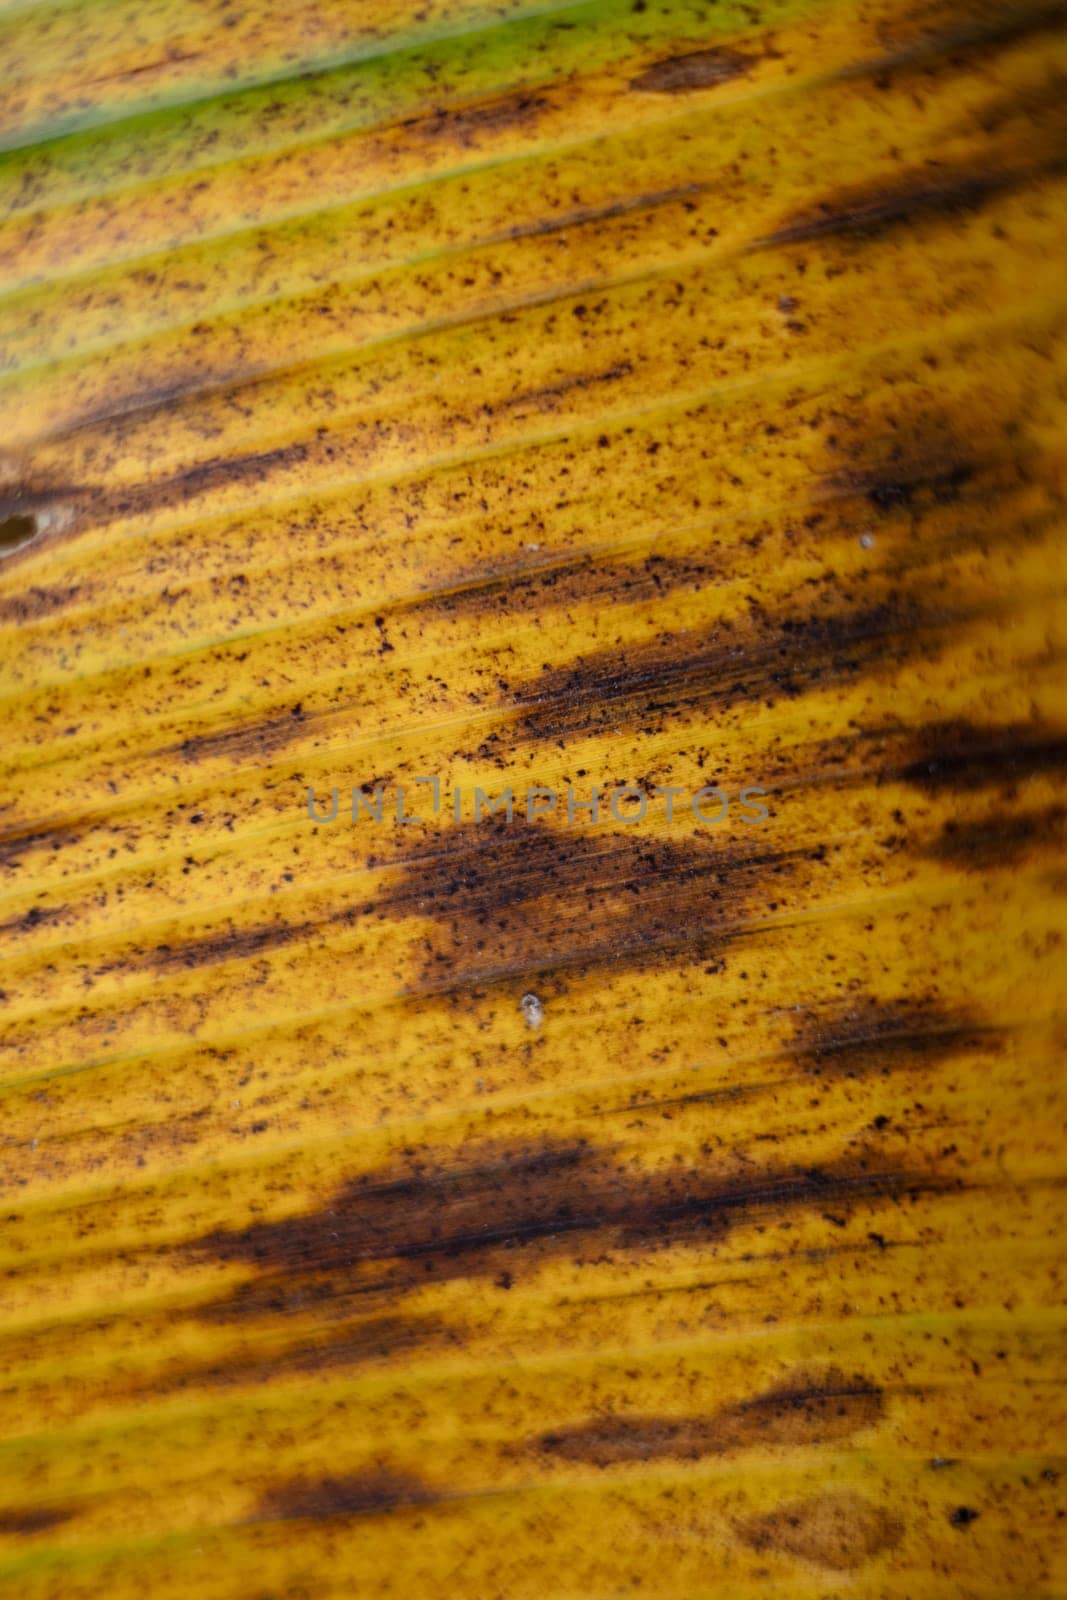 Background texture yellow banana leaf. Close-up old banana leave.